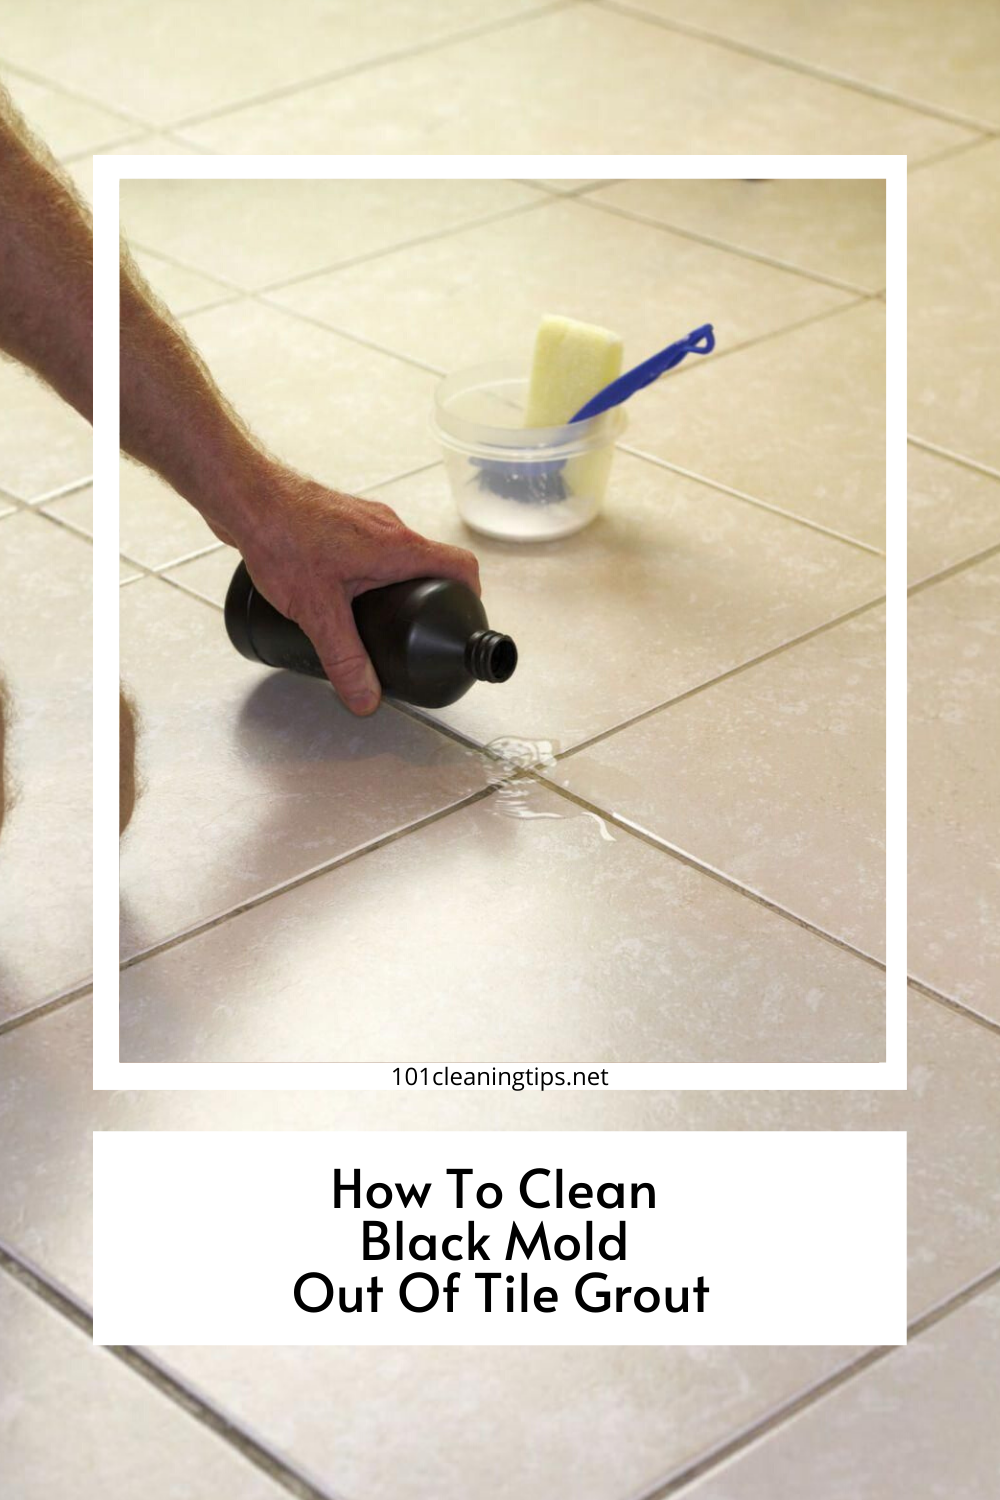 How To Clean Black Mold Out Of Tile Grout